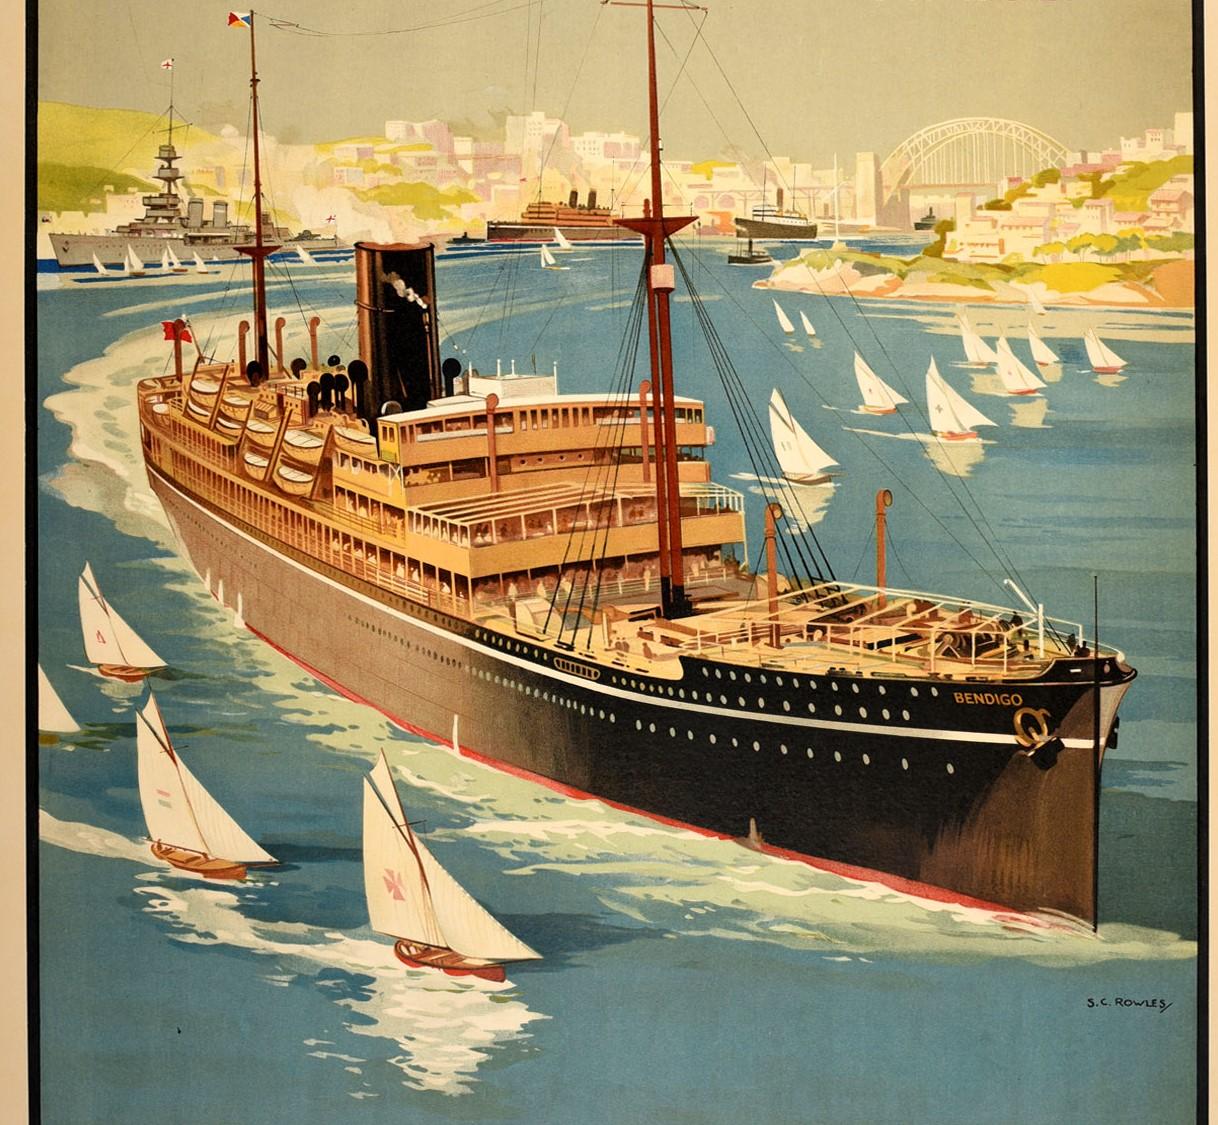 Original vintage cruise travel poster - P&O Branch Service to Australia via Malta Egypt & Ceylon (Sri Lanka) One class only Low rates Apply within - featuring a great image of the passenger liner Bendigo sailing out of Sydney Harbour surrounded by